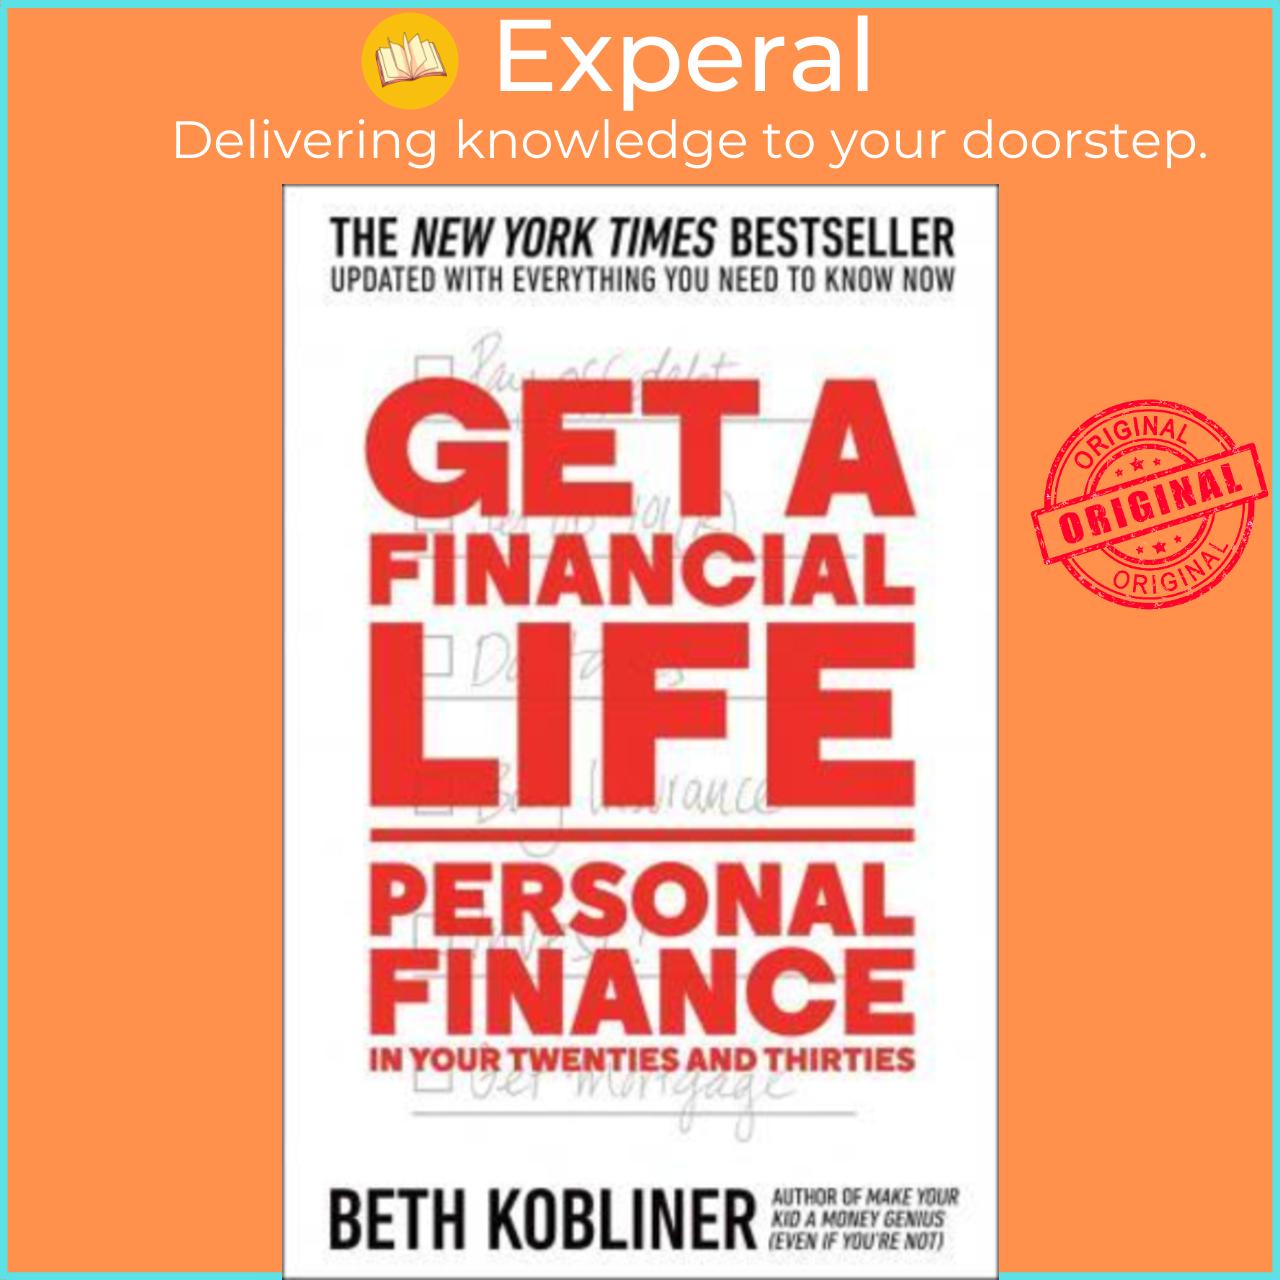 Sách - Get a Financial Life: Personal Finance in Your Twenties and Thirties by Beth Kobliner (US edition, paperback)